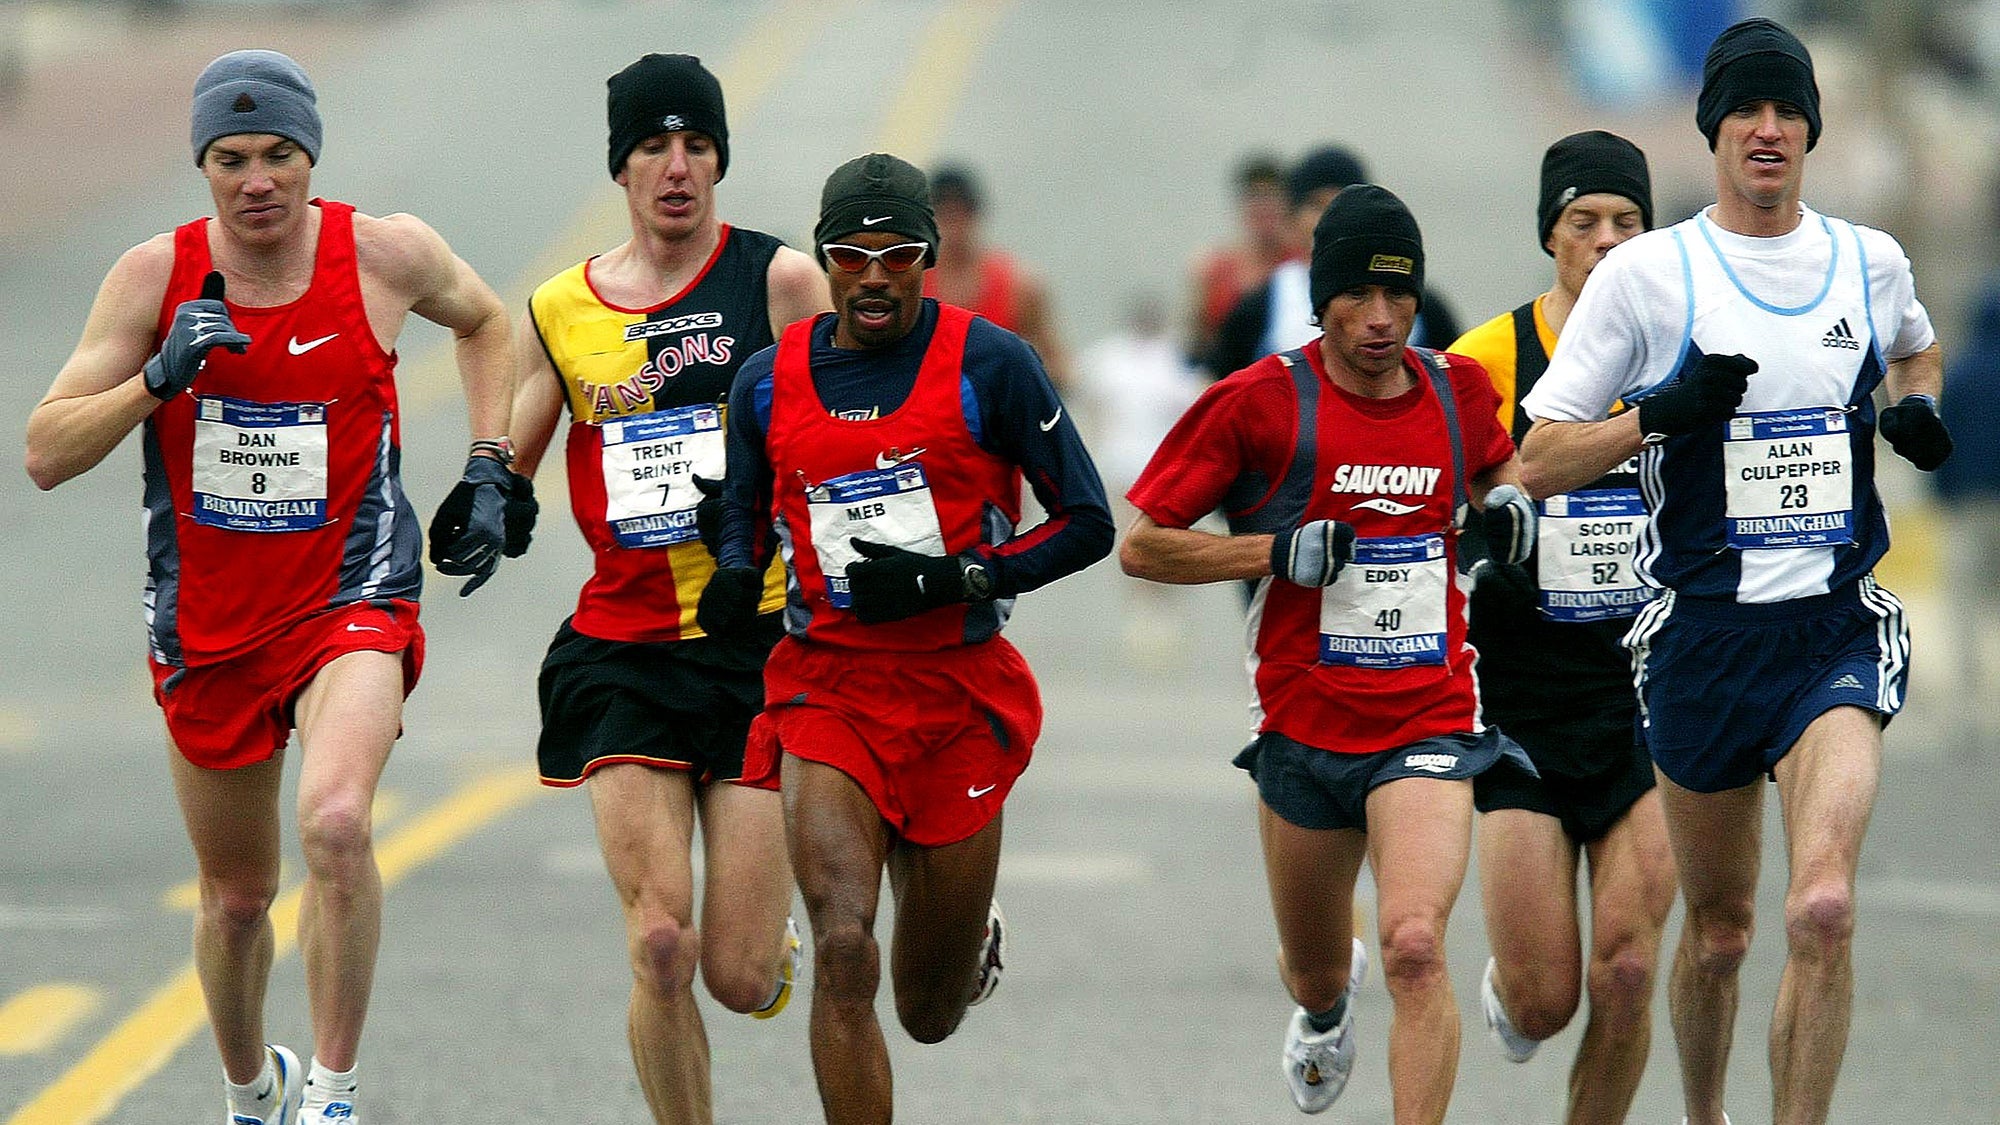 6 Easy Steps to Make the Perfect Gift for Your Boston Marathoner